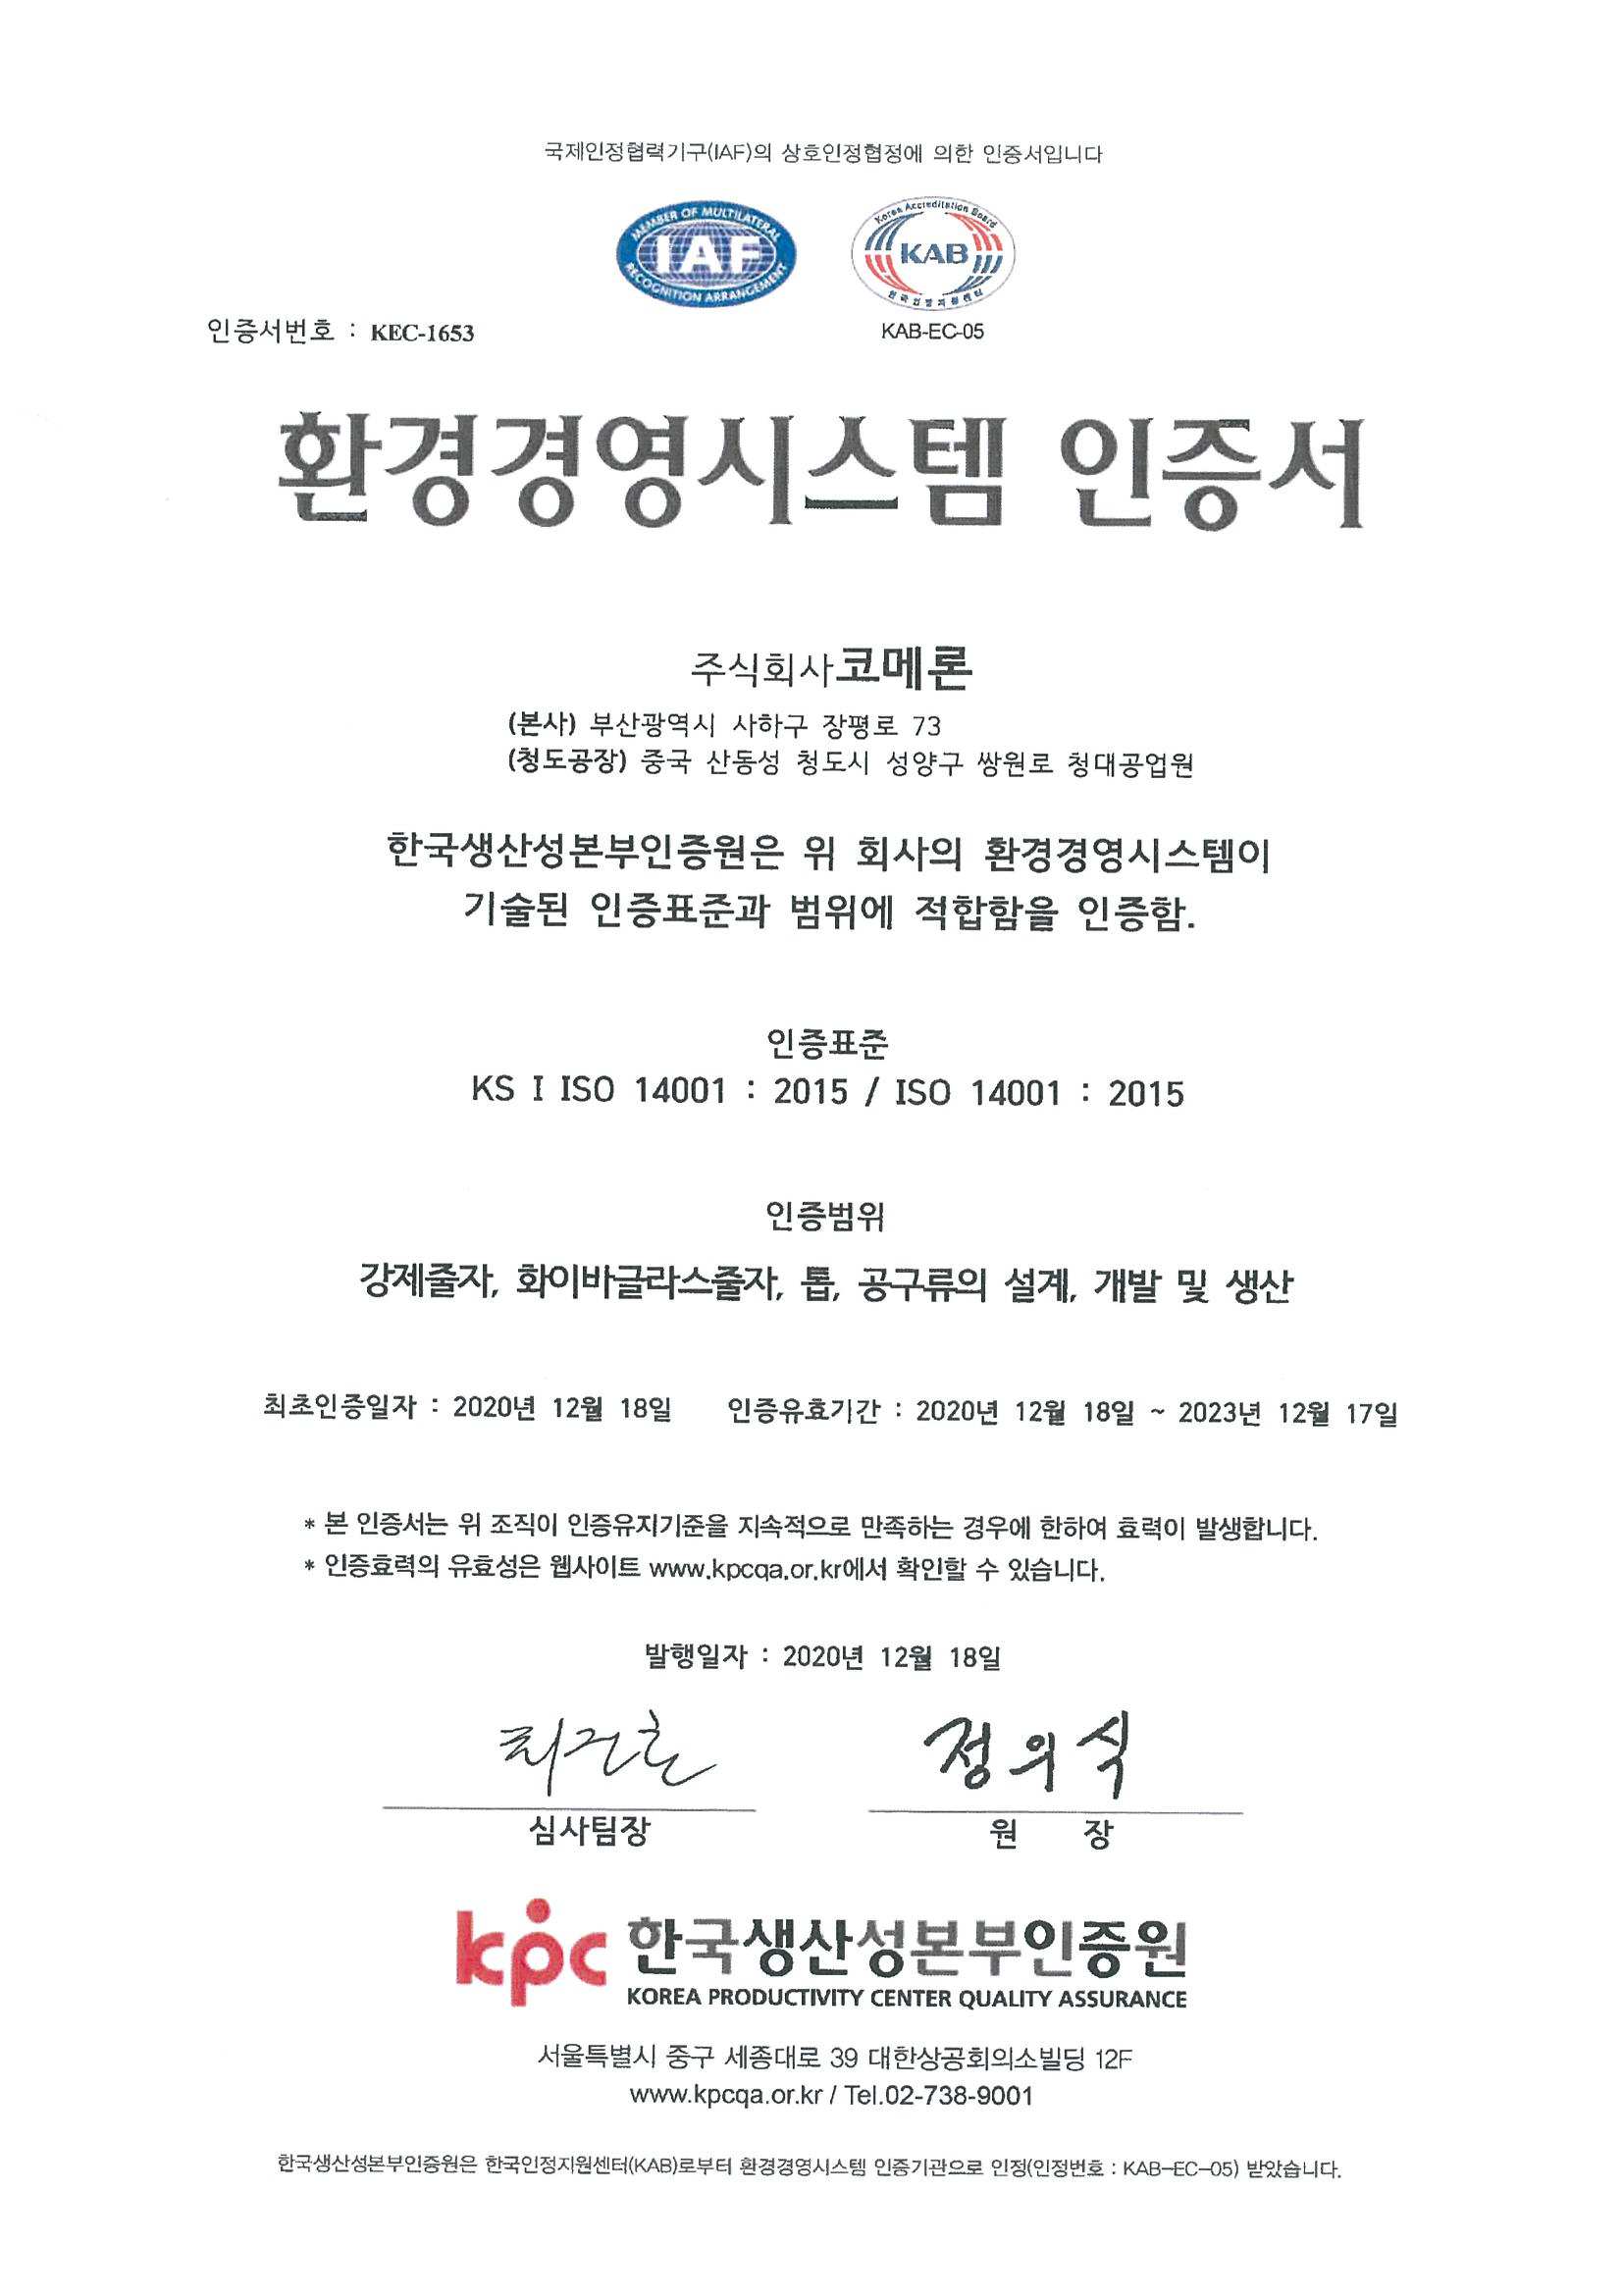 ISO140012015 썸네일 이미지